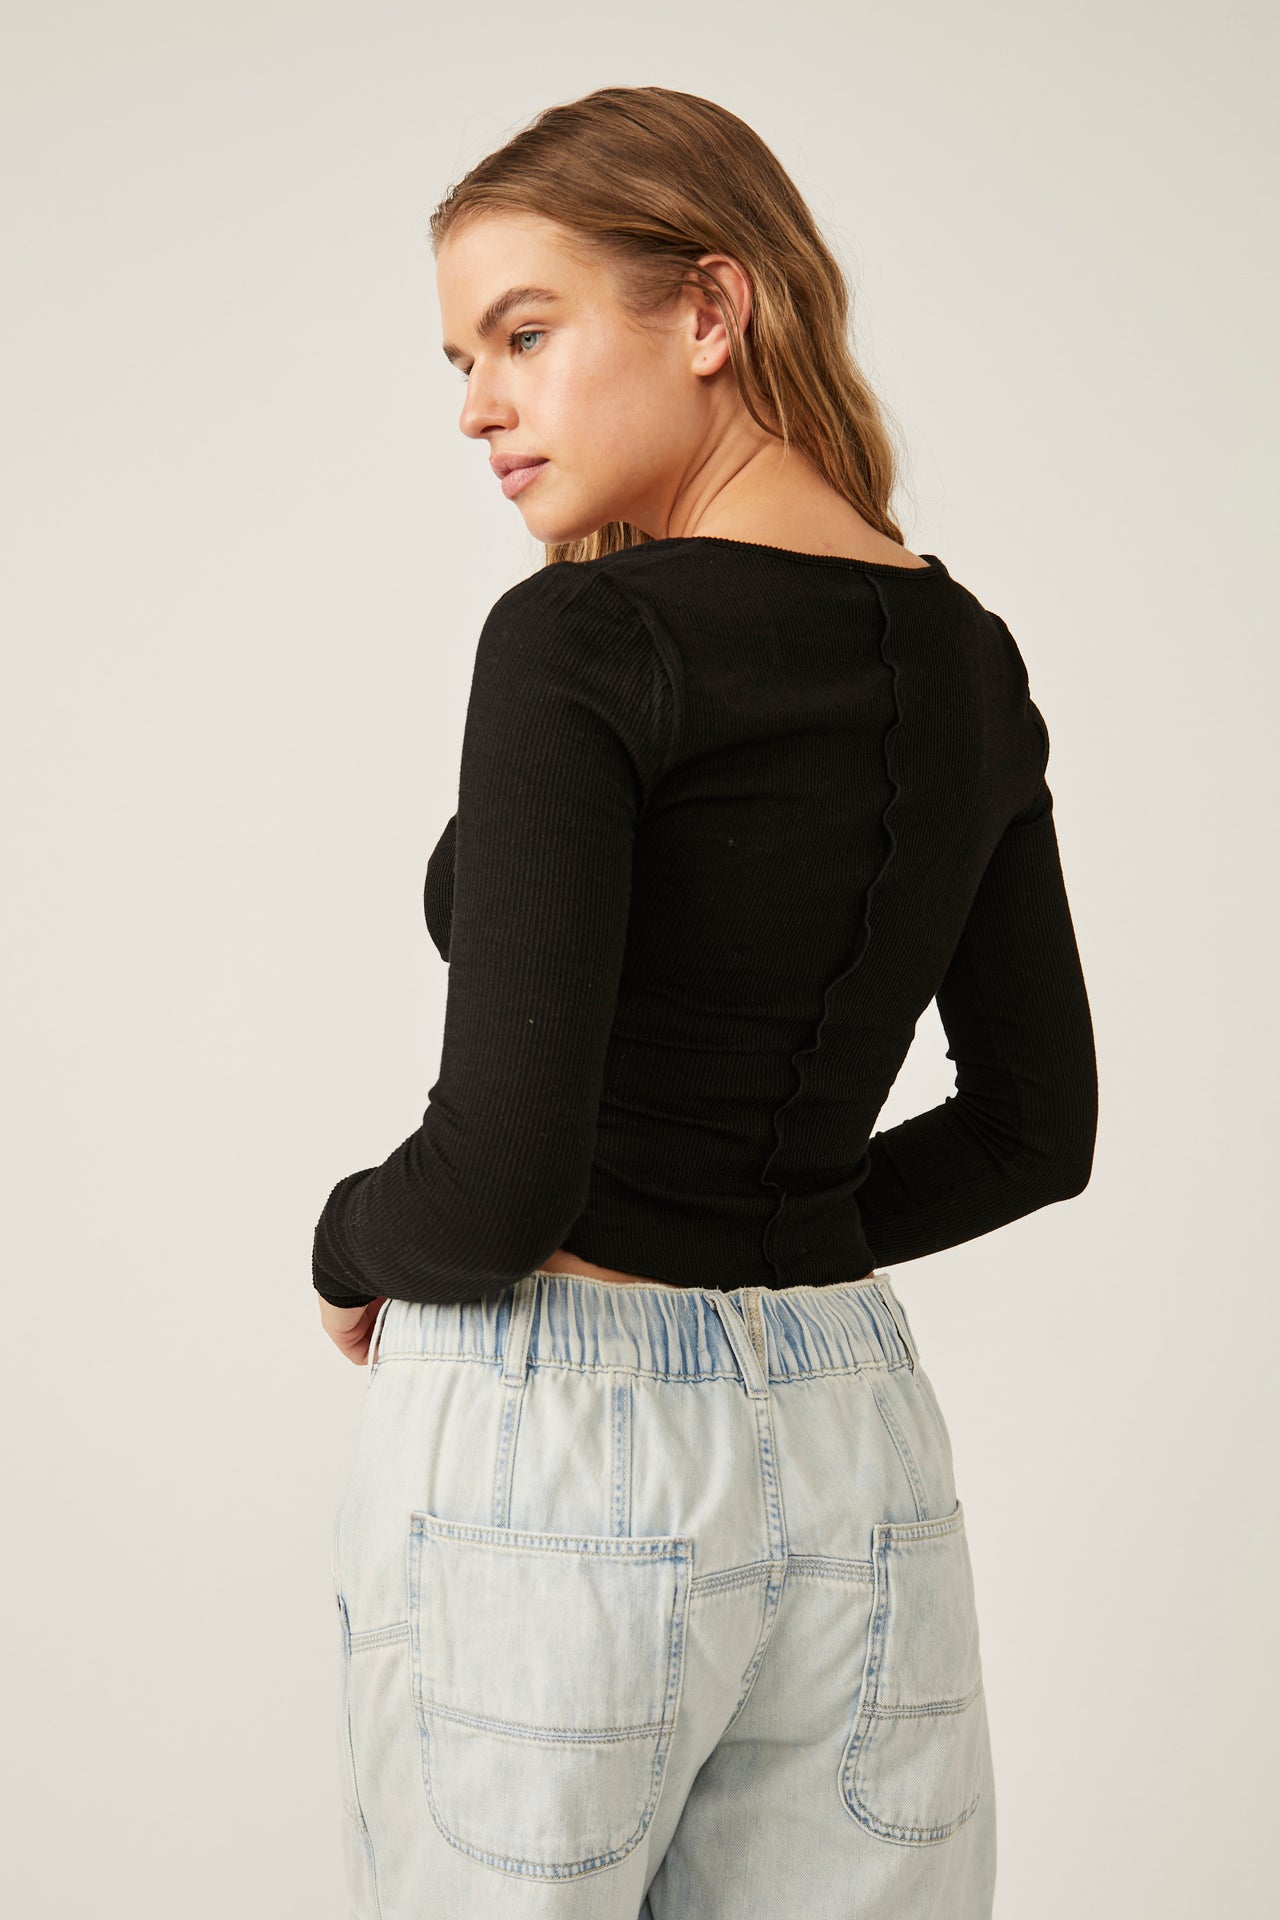 Keep It Basic Top Black, Tops by Free People | LIT Boutique